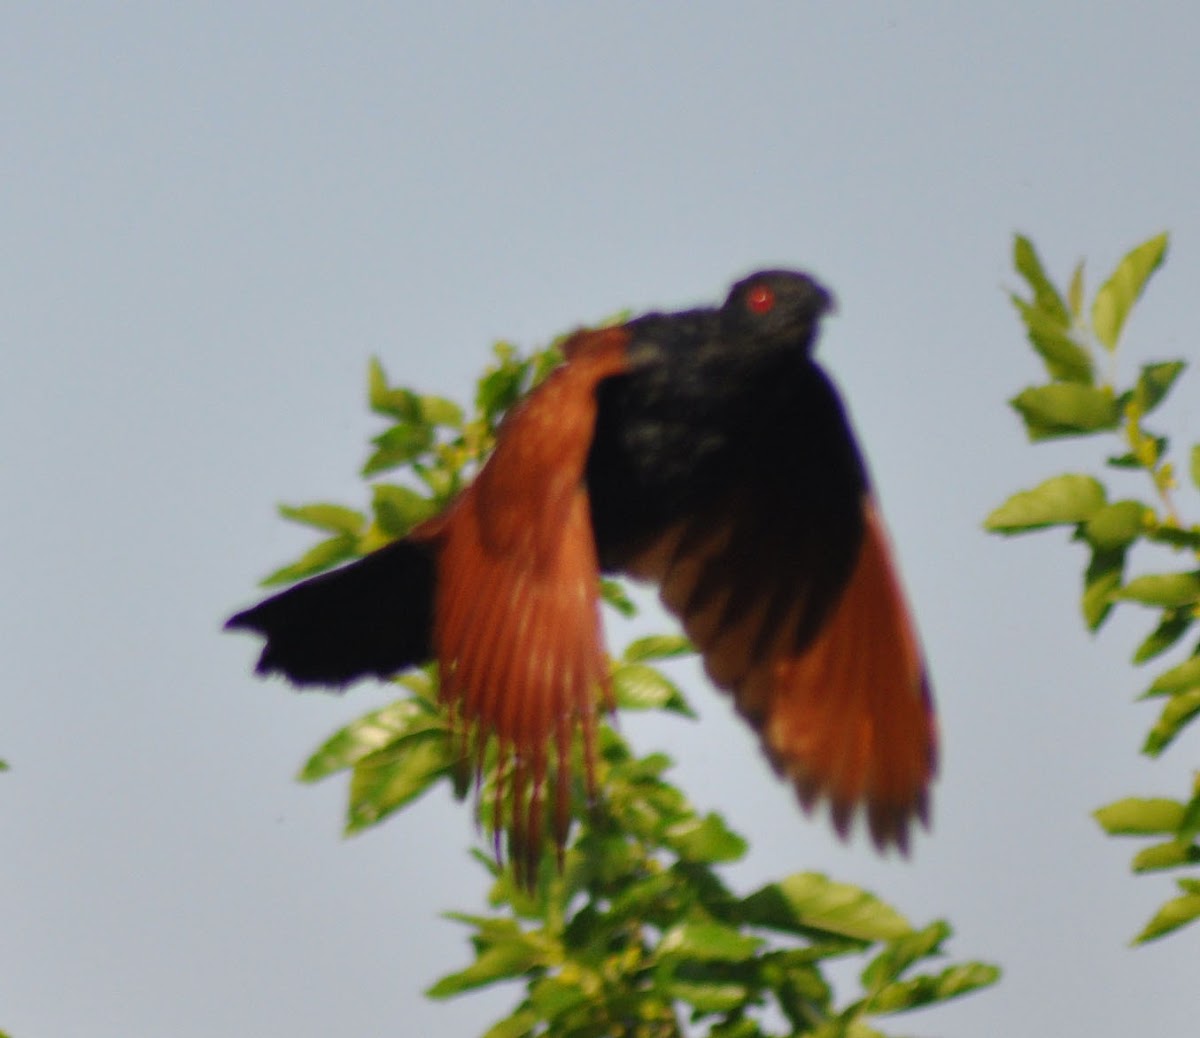 Greater Coucal / Crow Pheasant